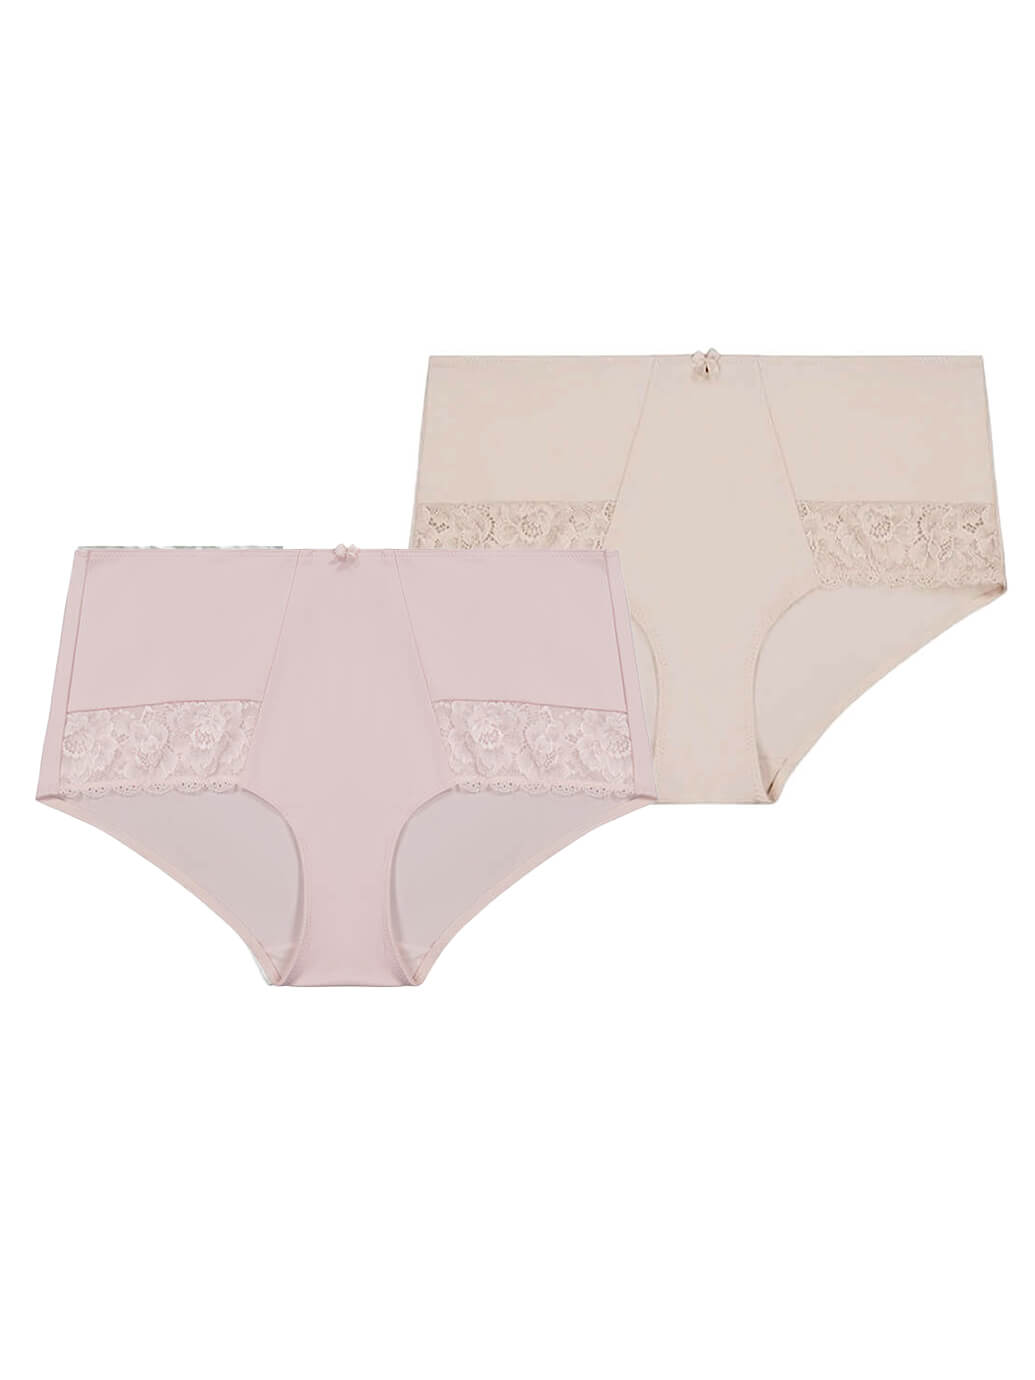 Dahlia Lace Midi Short Briefs (2pack) - Almond and Pink Smoke